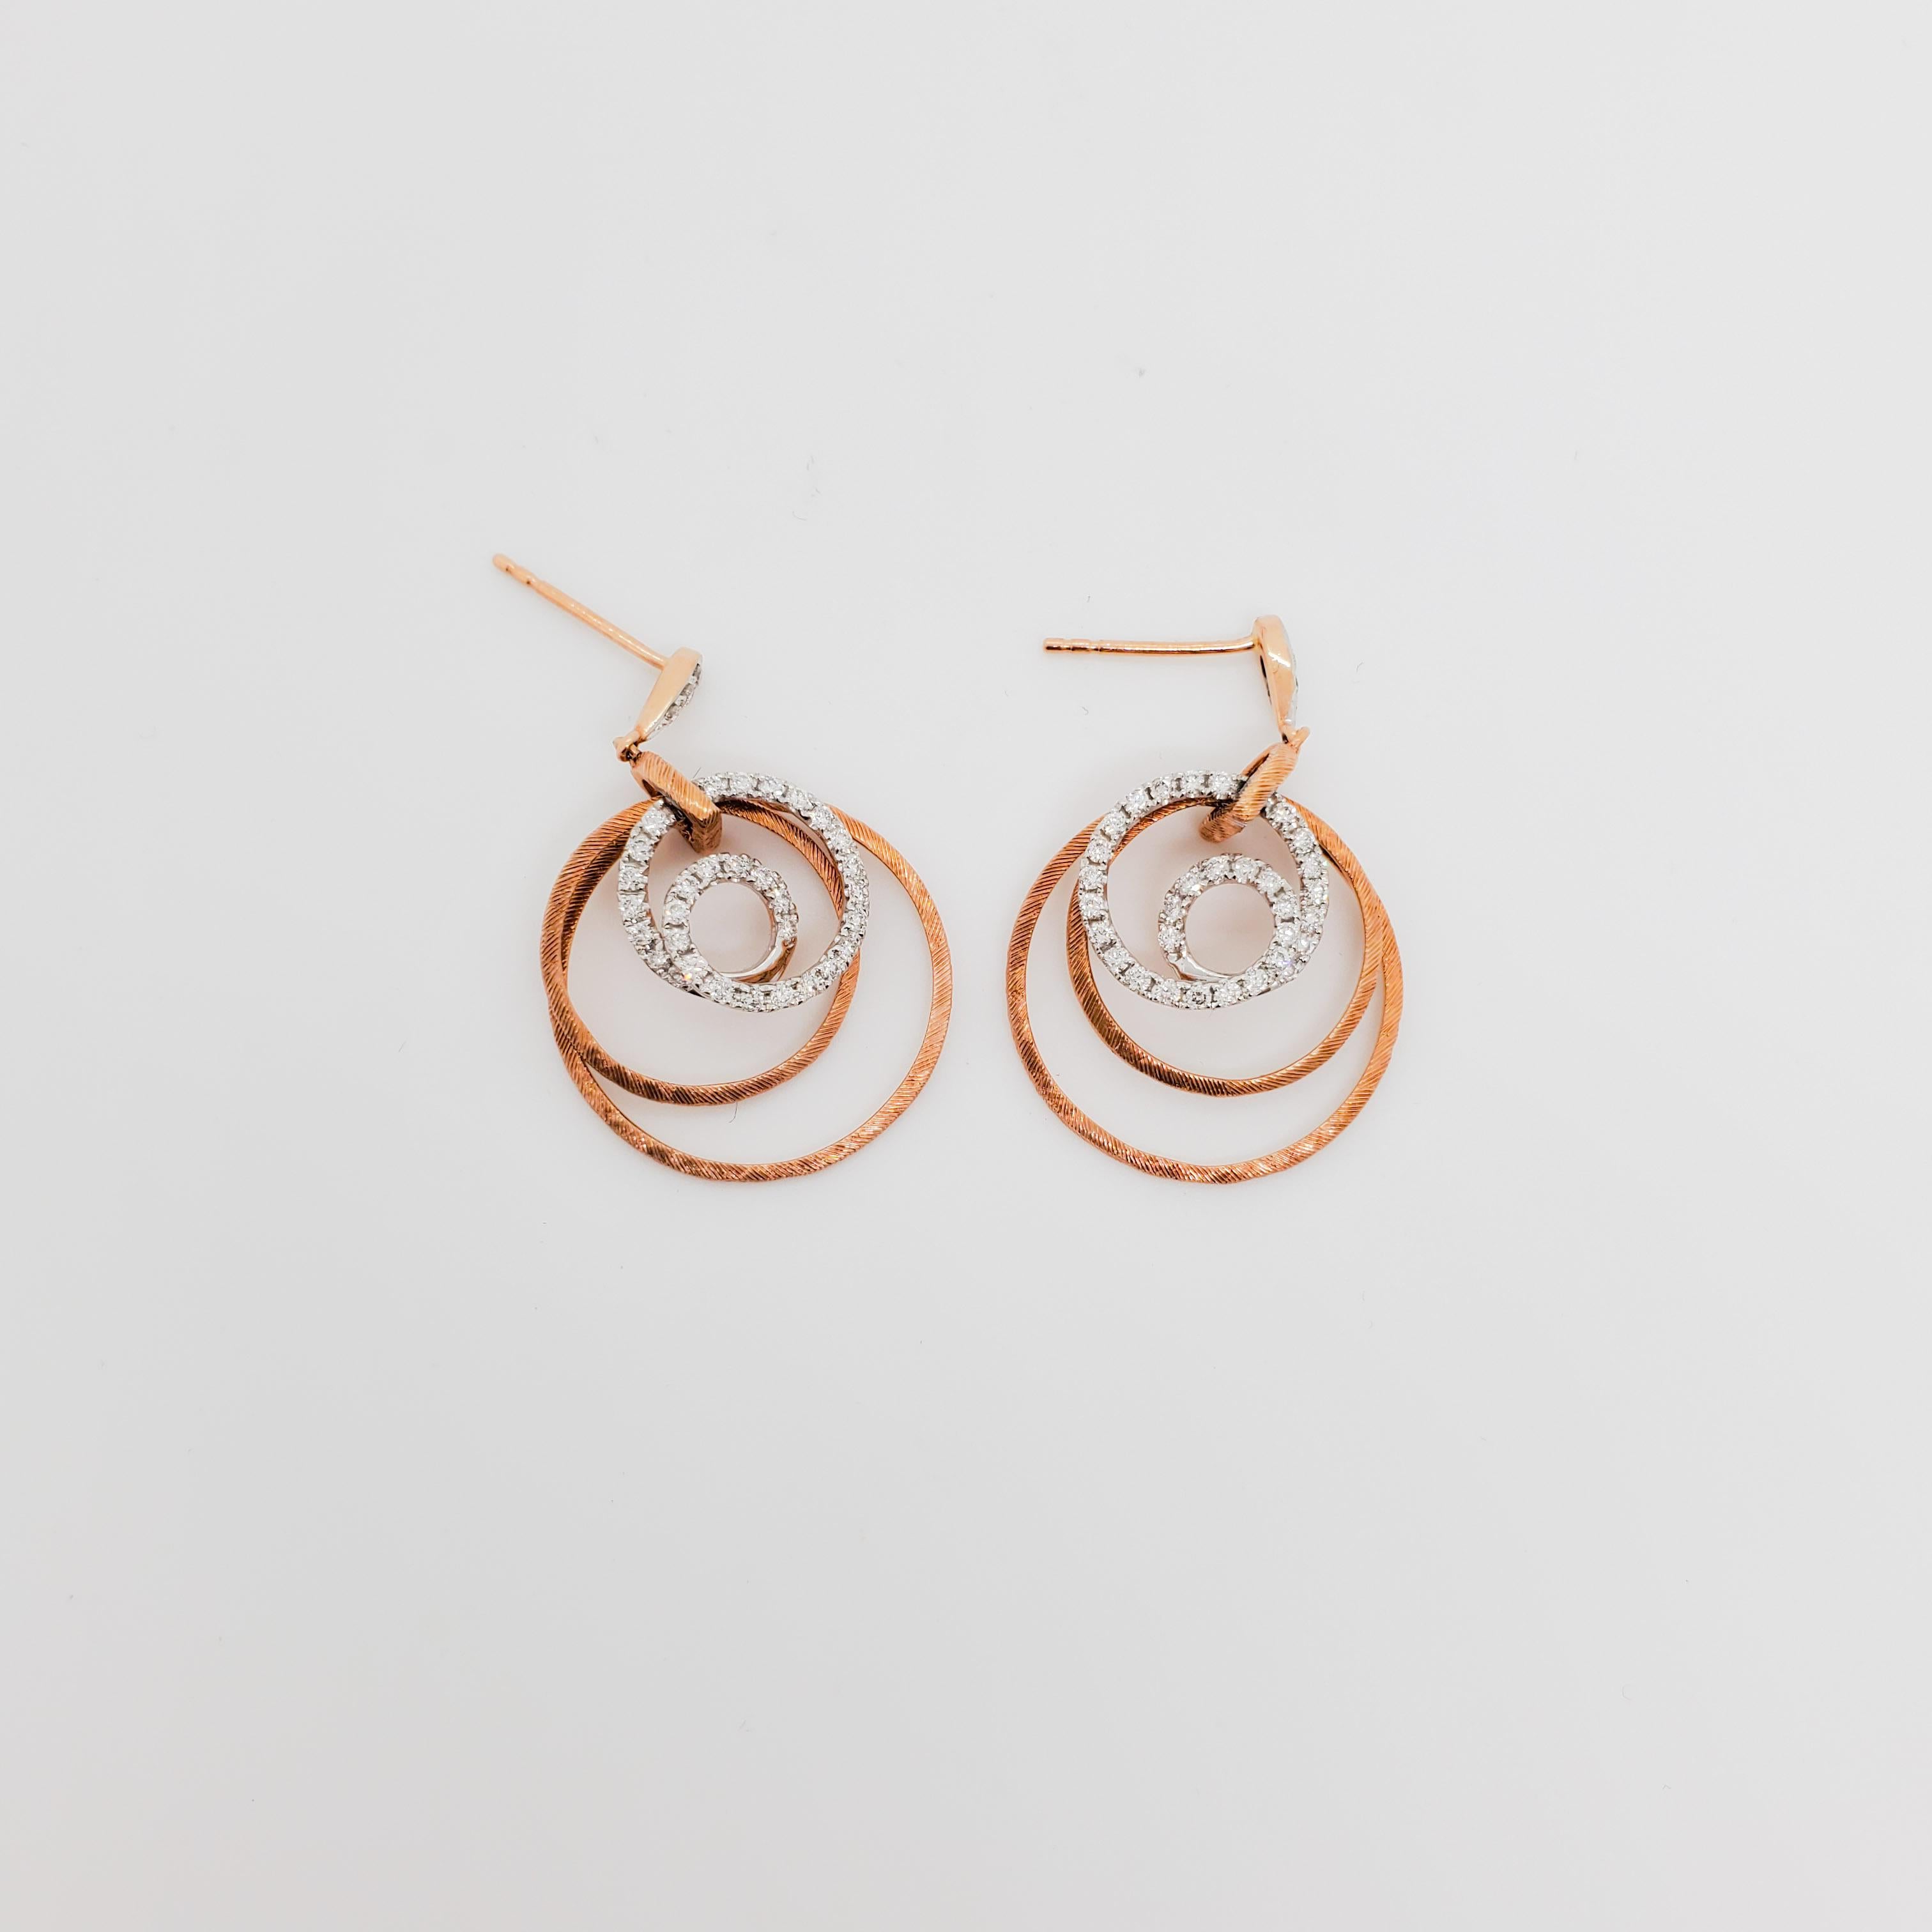 Gorgeous earrings with 0.67 ct. good quality, white, and bright diamond rounds.  Circular design in handmade 14k white and rose gold.  Satin and polish finish.